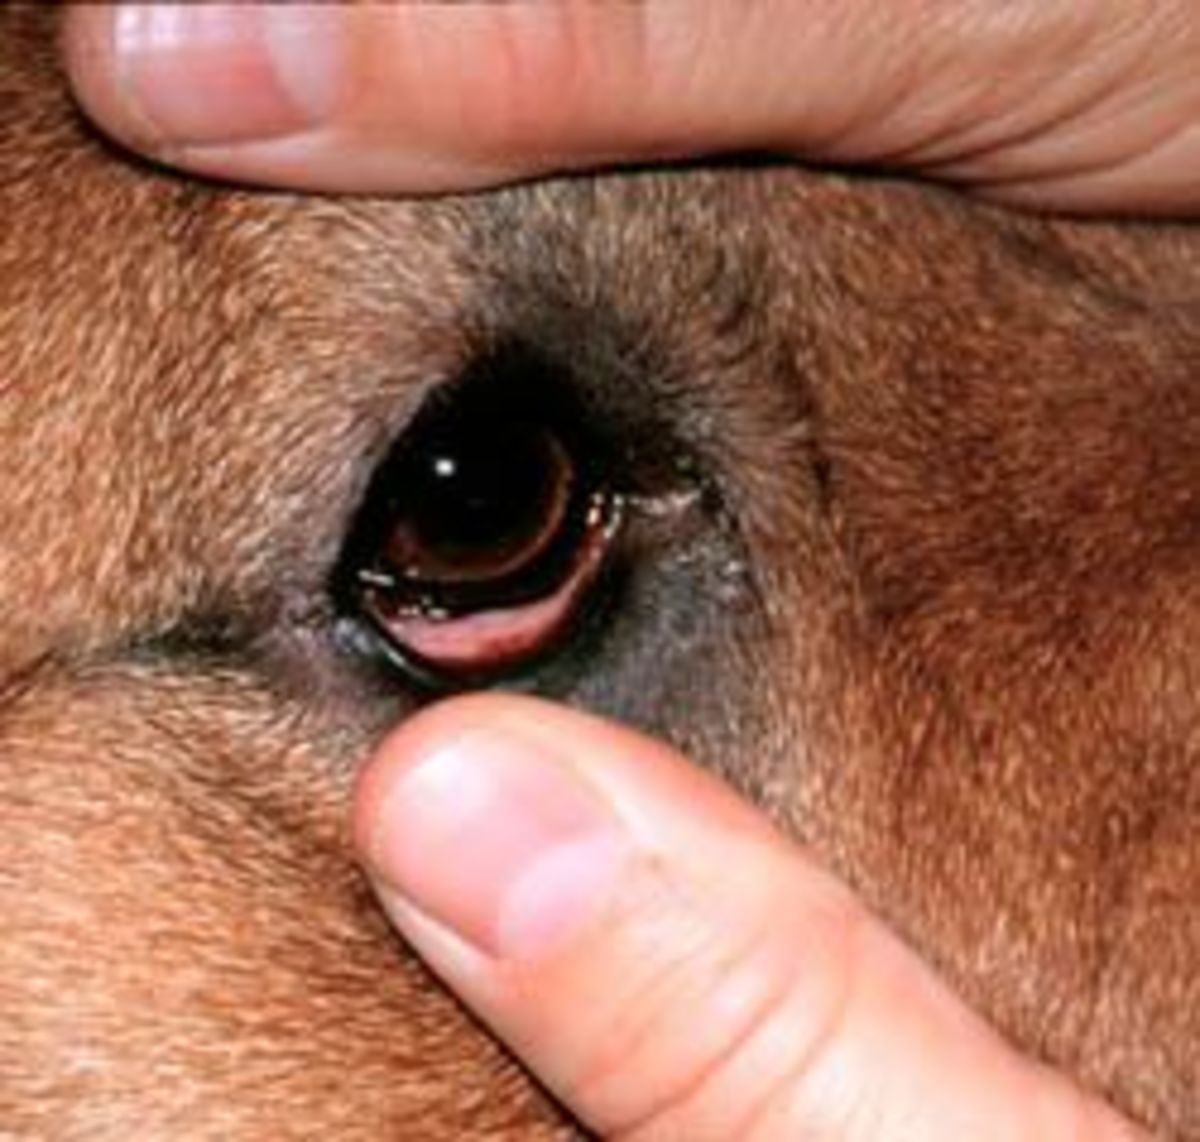 A dog with conjunctivitis